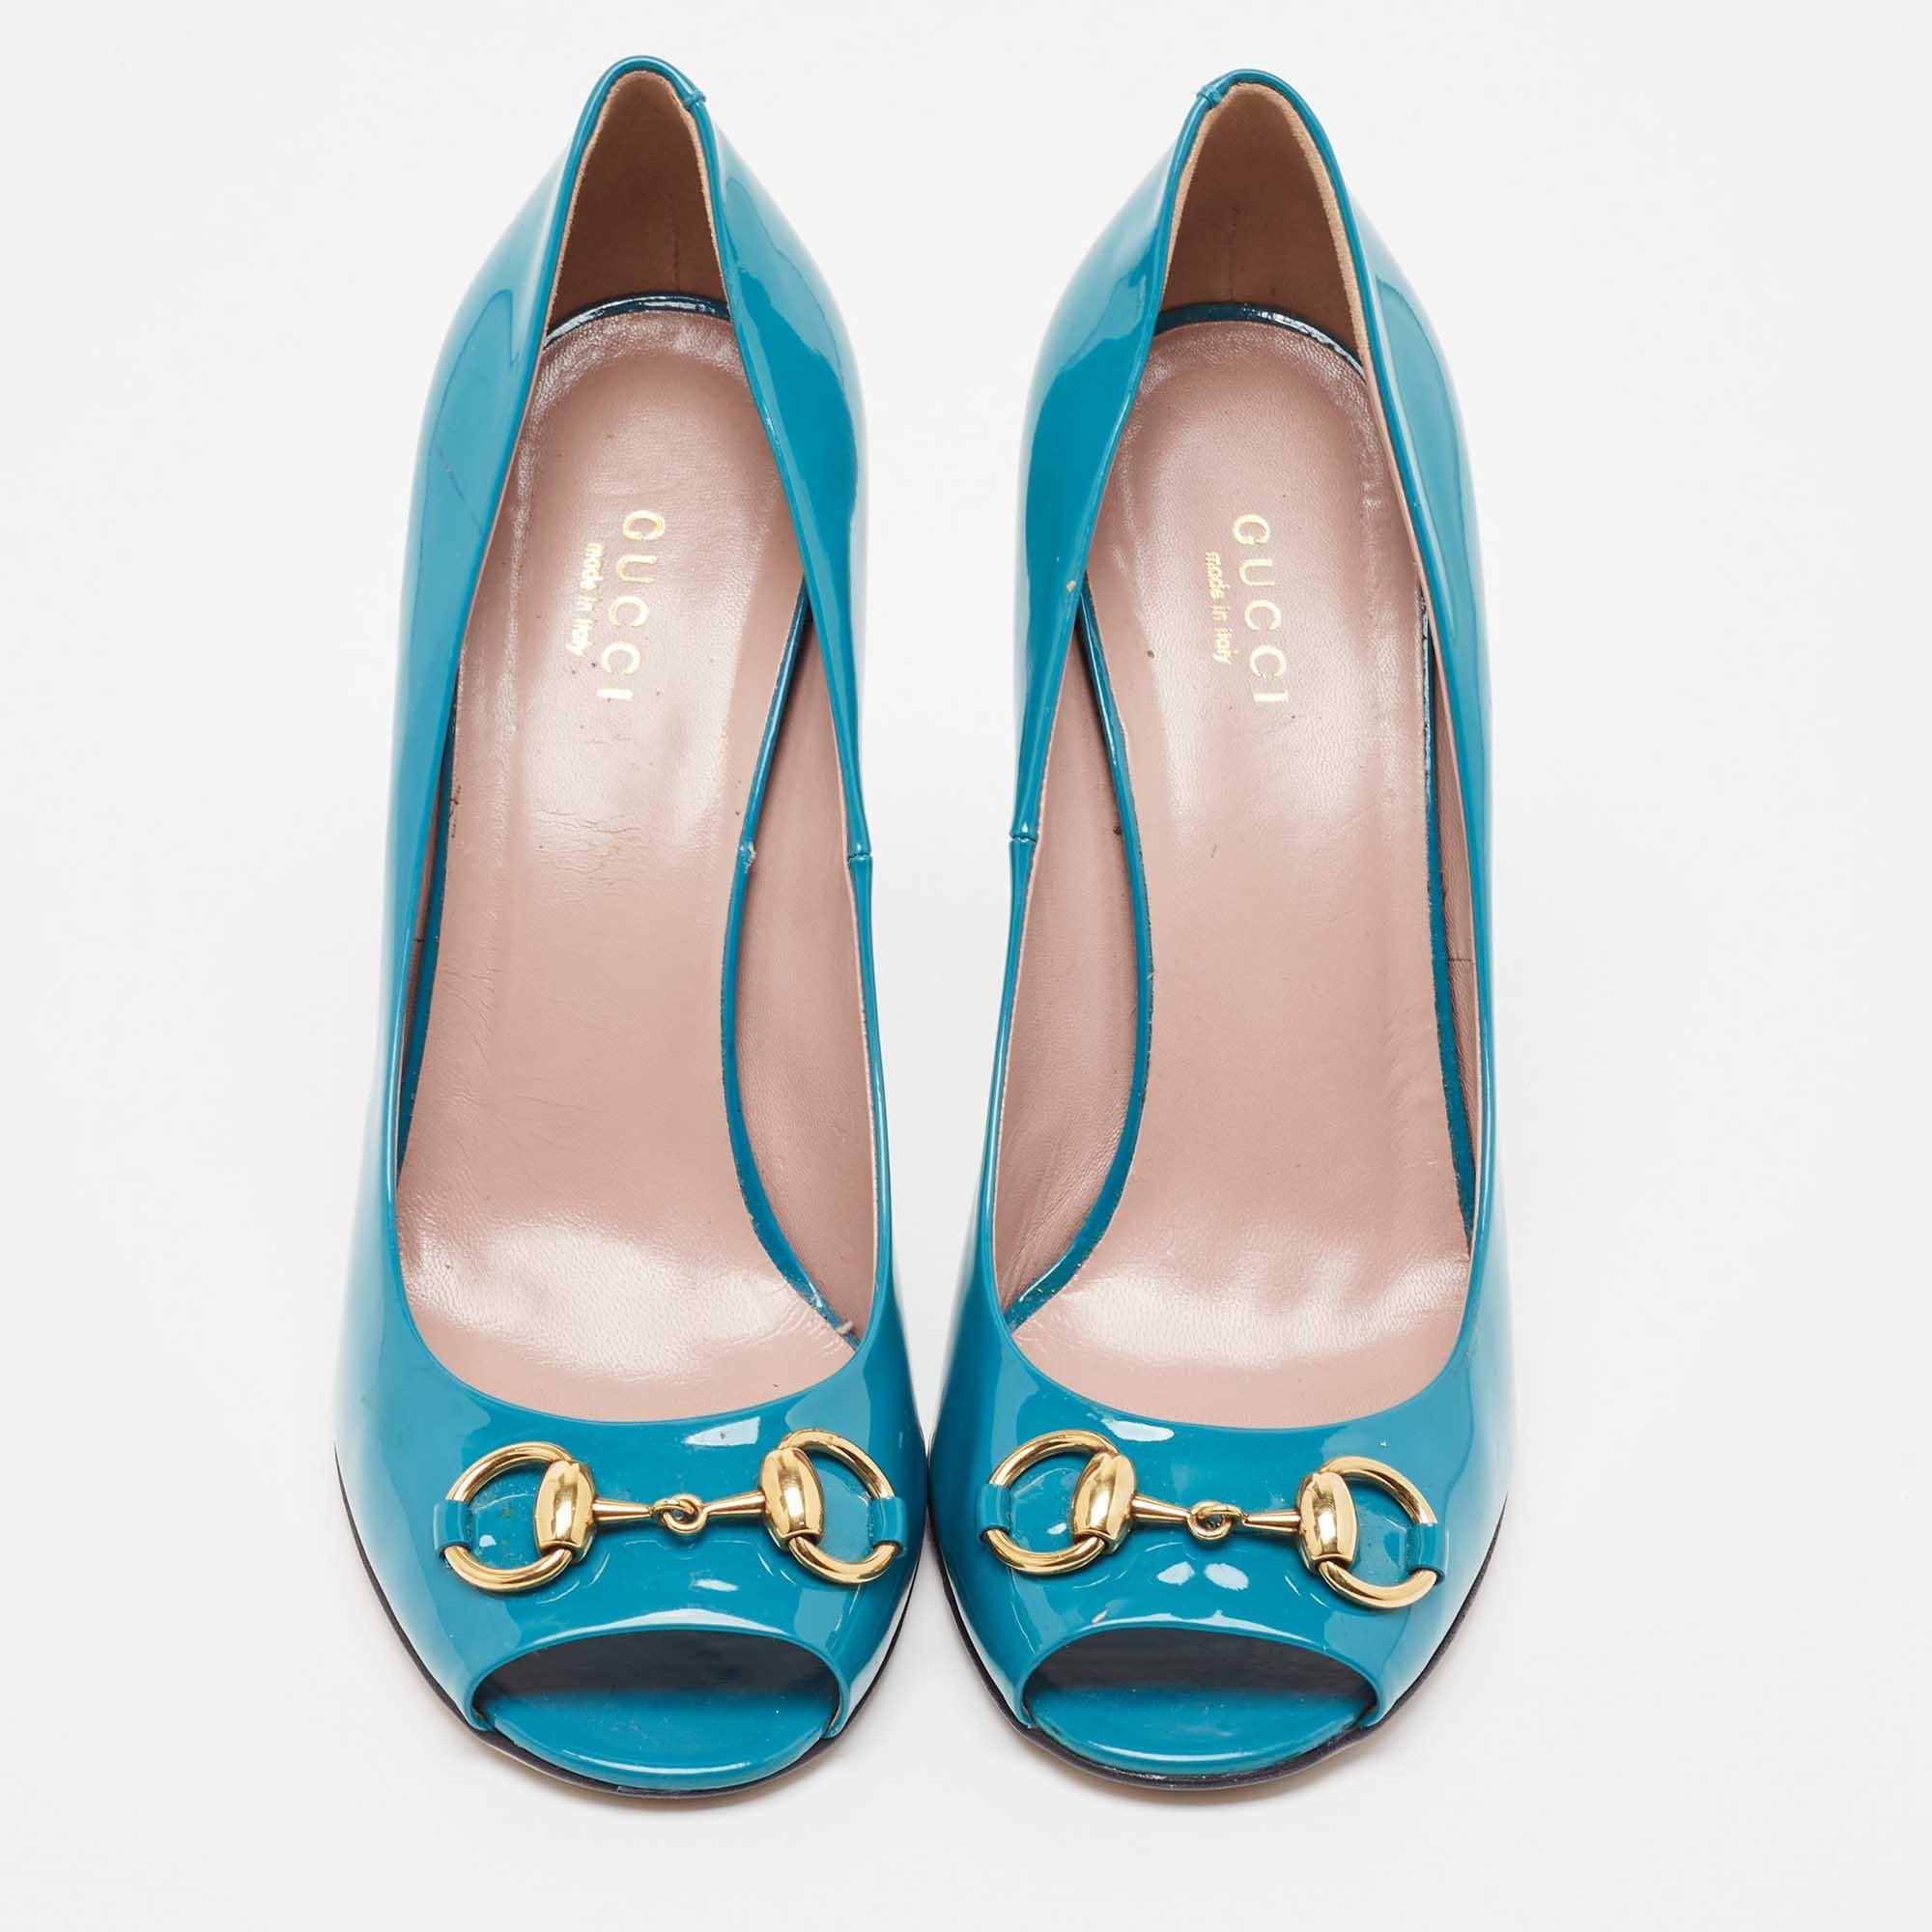 The fashion house’s tradition of excellence, coupled with modern design sensibilities, works to make these Gucci Horsebit pumps a fabulous choice. They'll help you deliver a chic look with ease.

